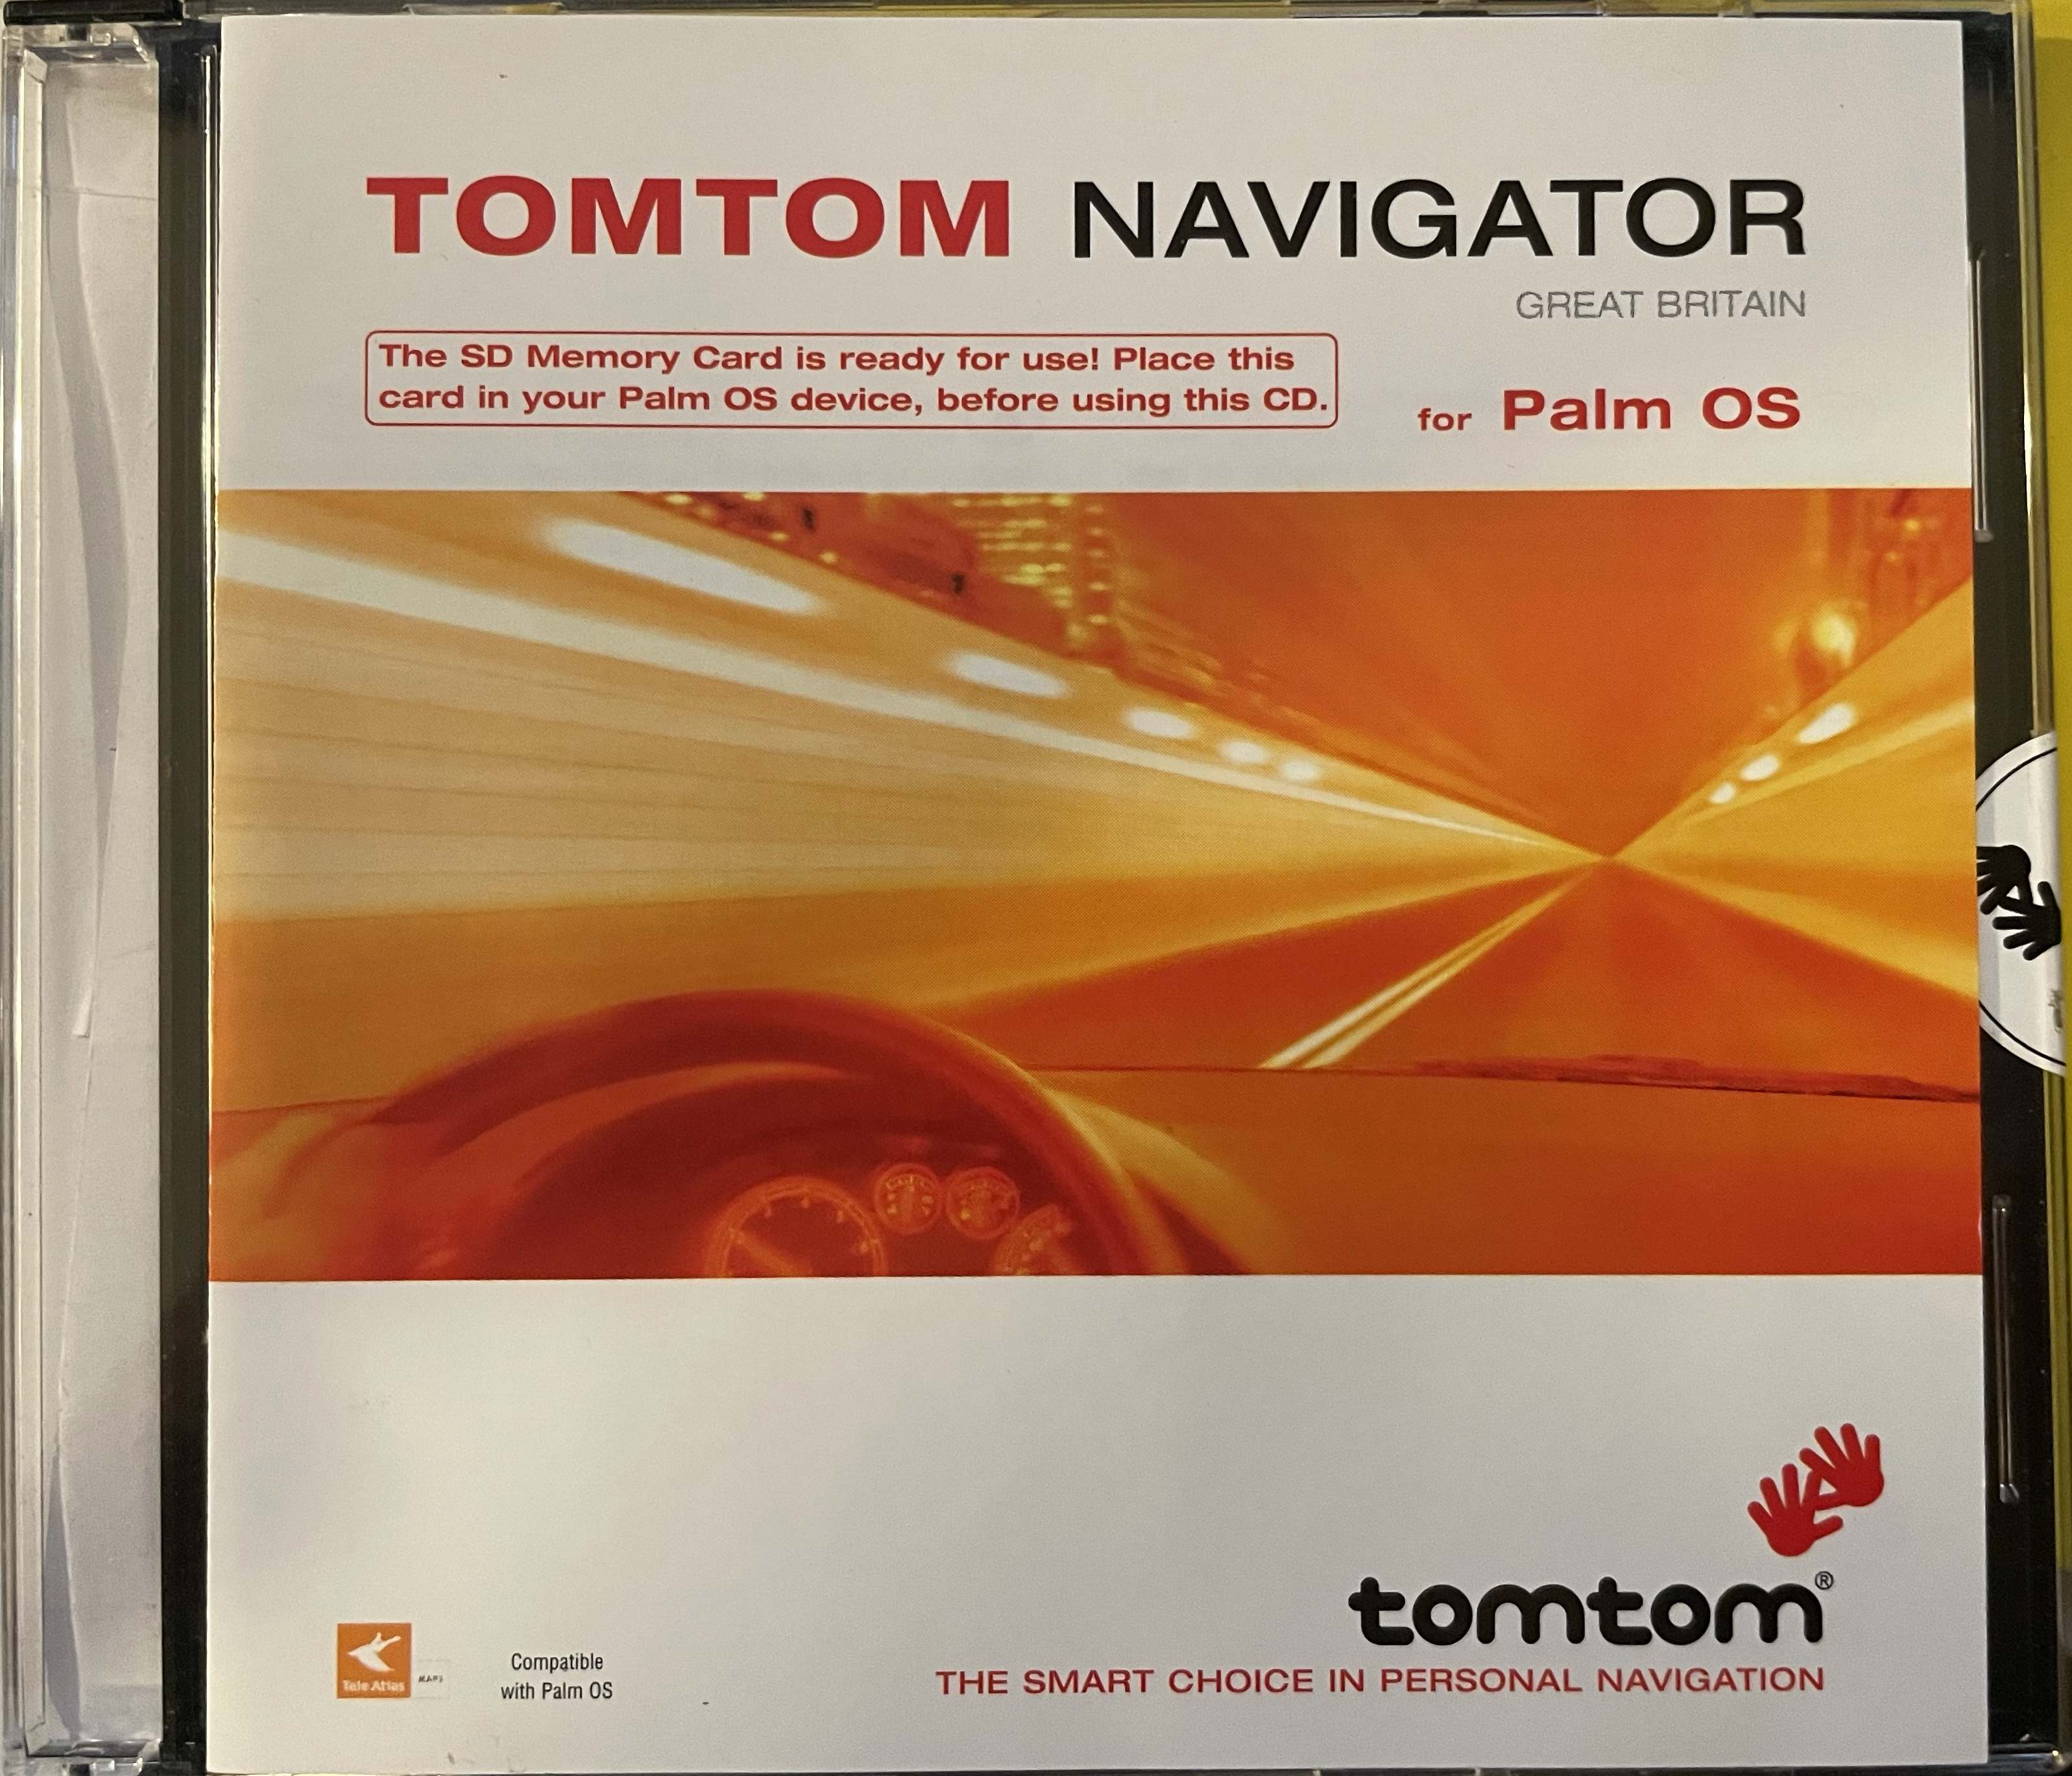 TomTom Navigator for PalmOS - Great Britain (April 2004)